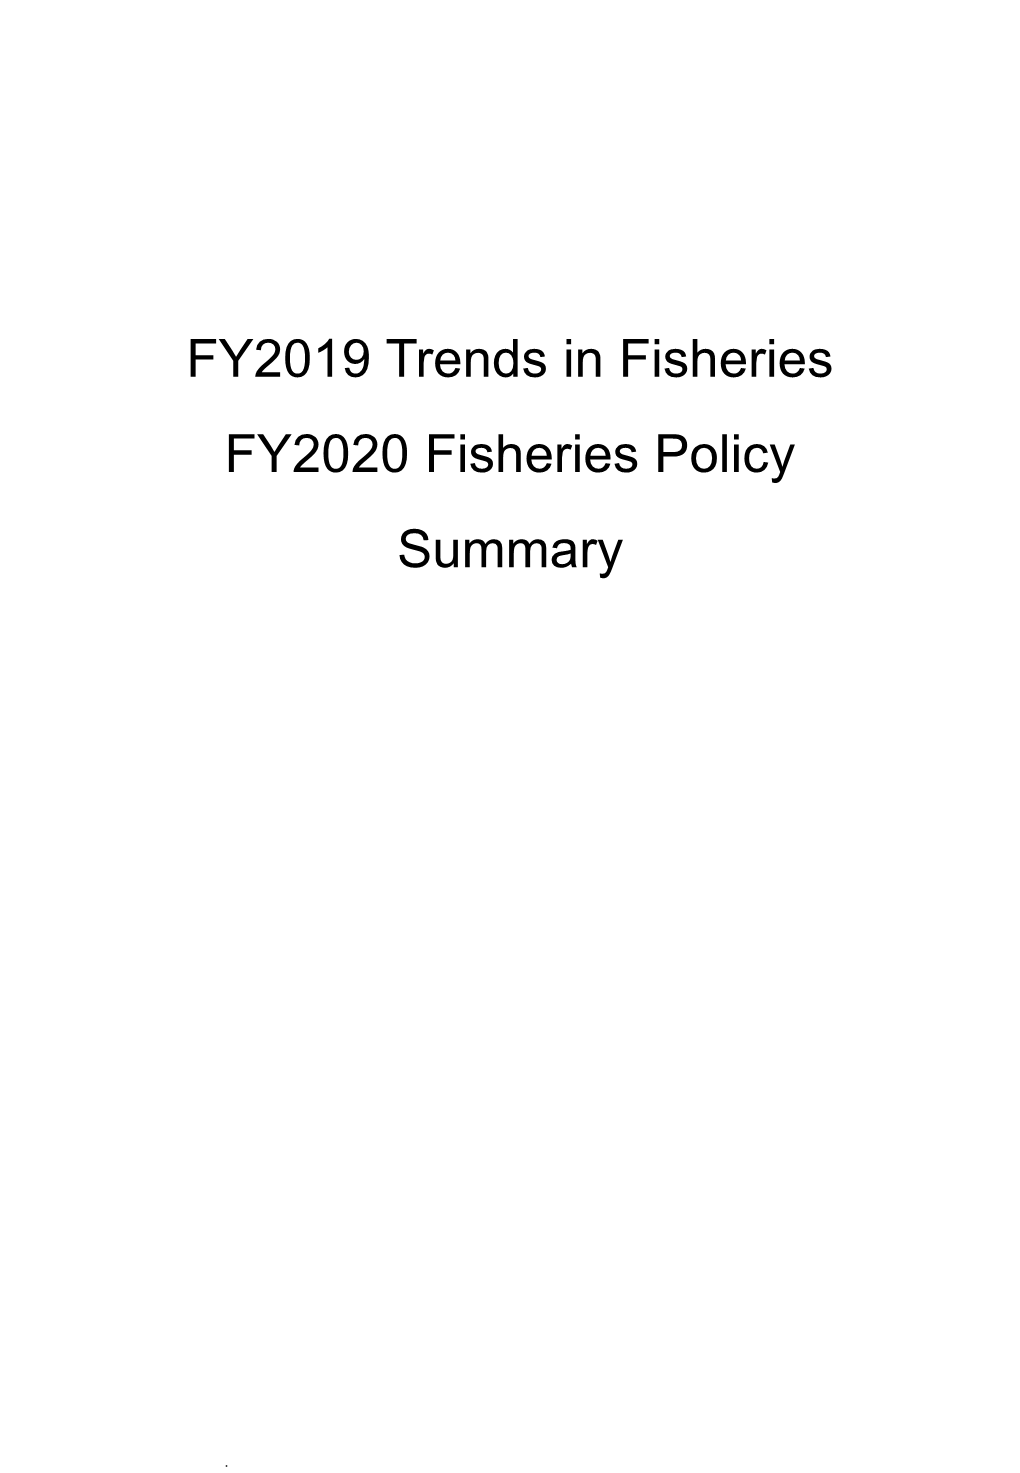 FY2019 Trends in Fisheries FY2020 Fisheries Policy Summary